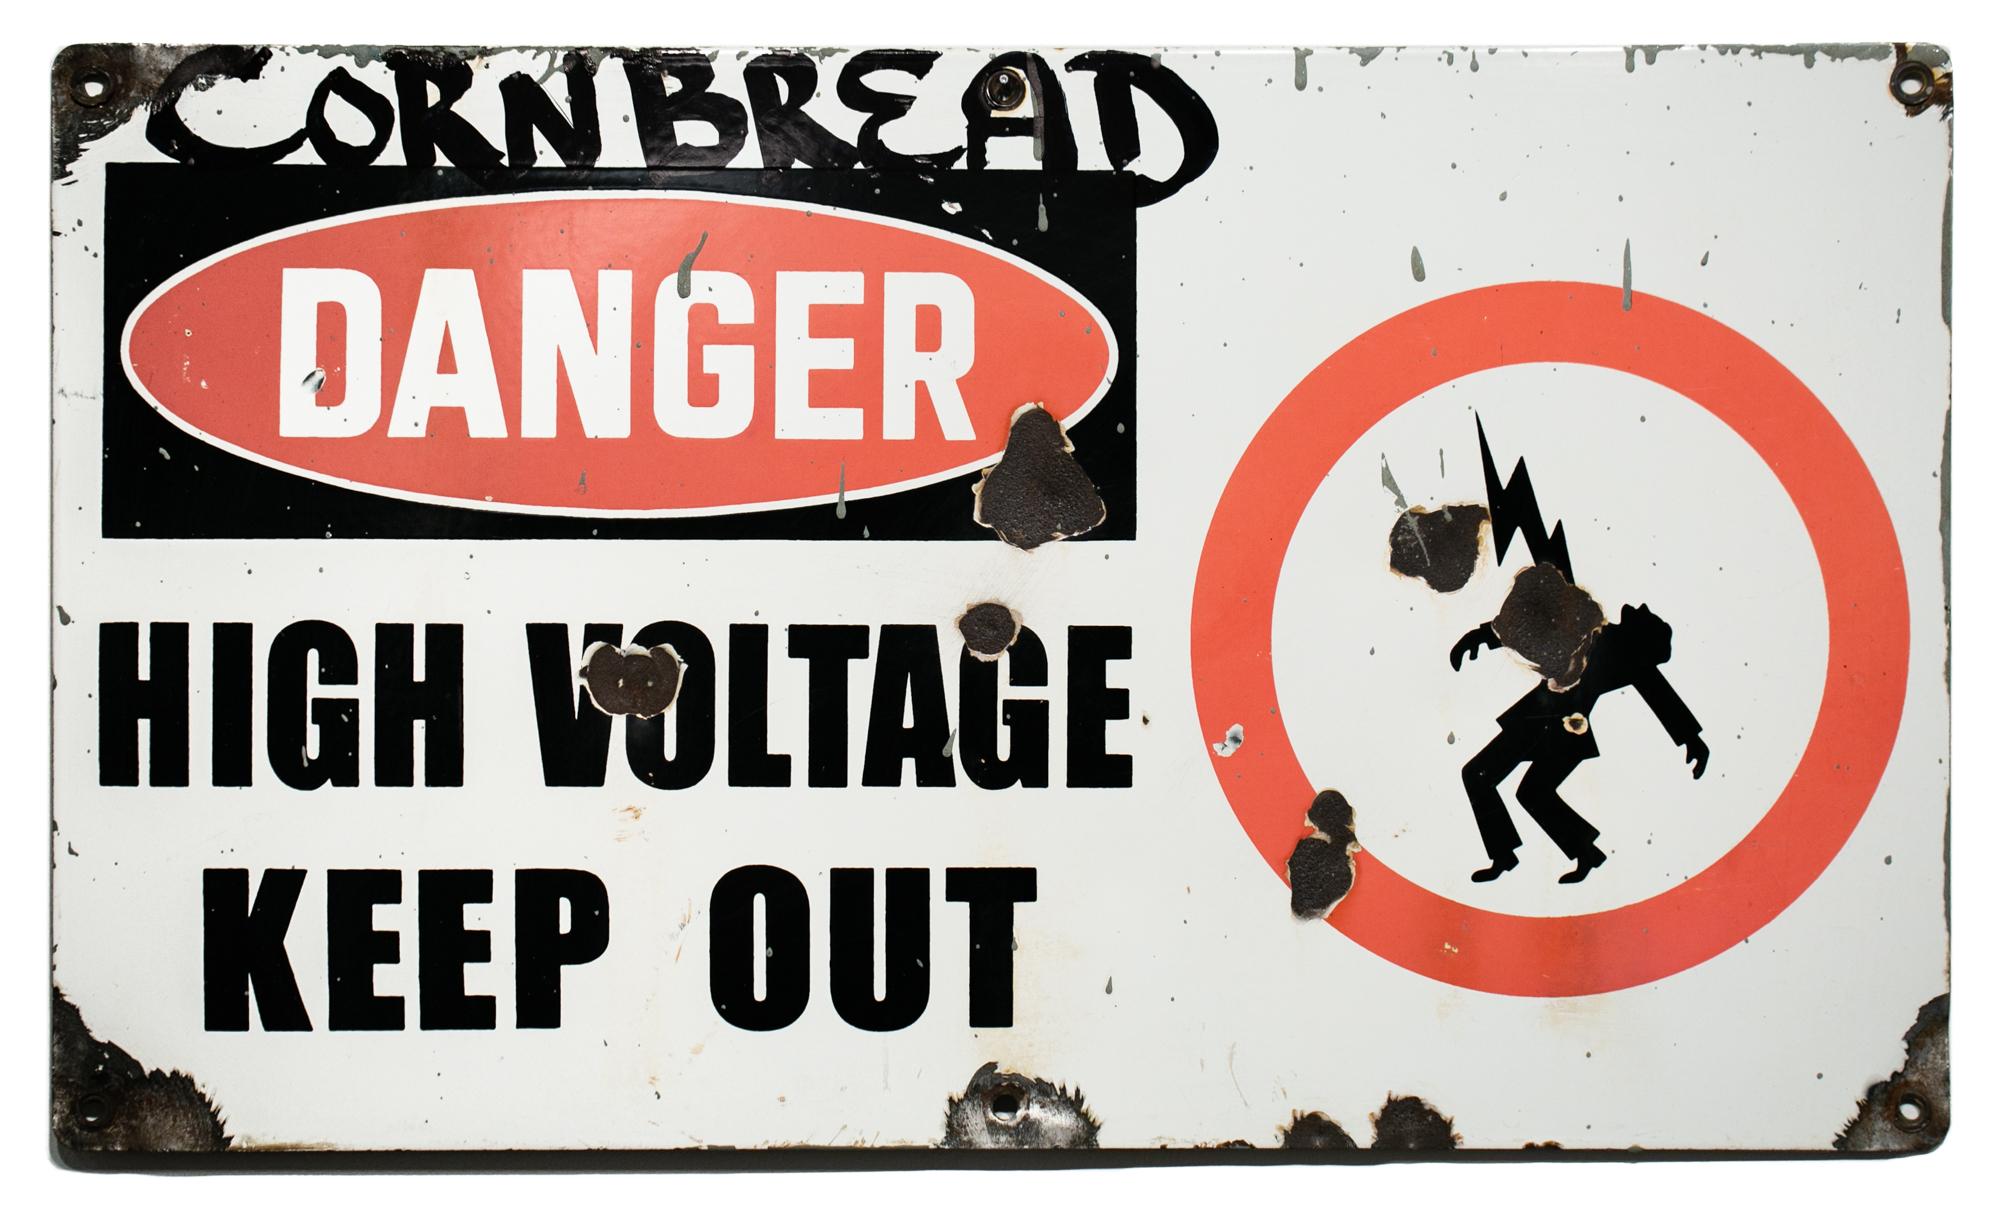 Danger High Voltage Keep Out - Painting by Cornbread